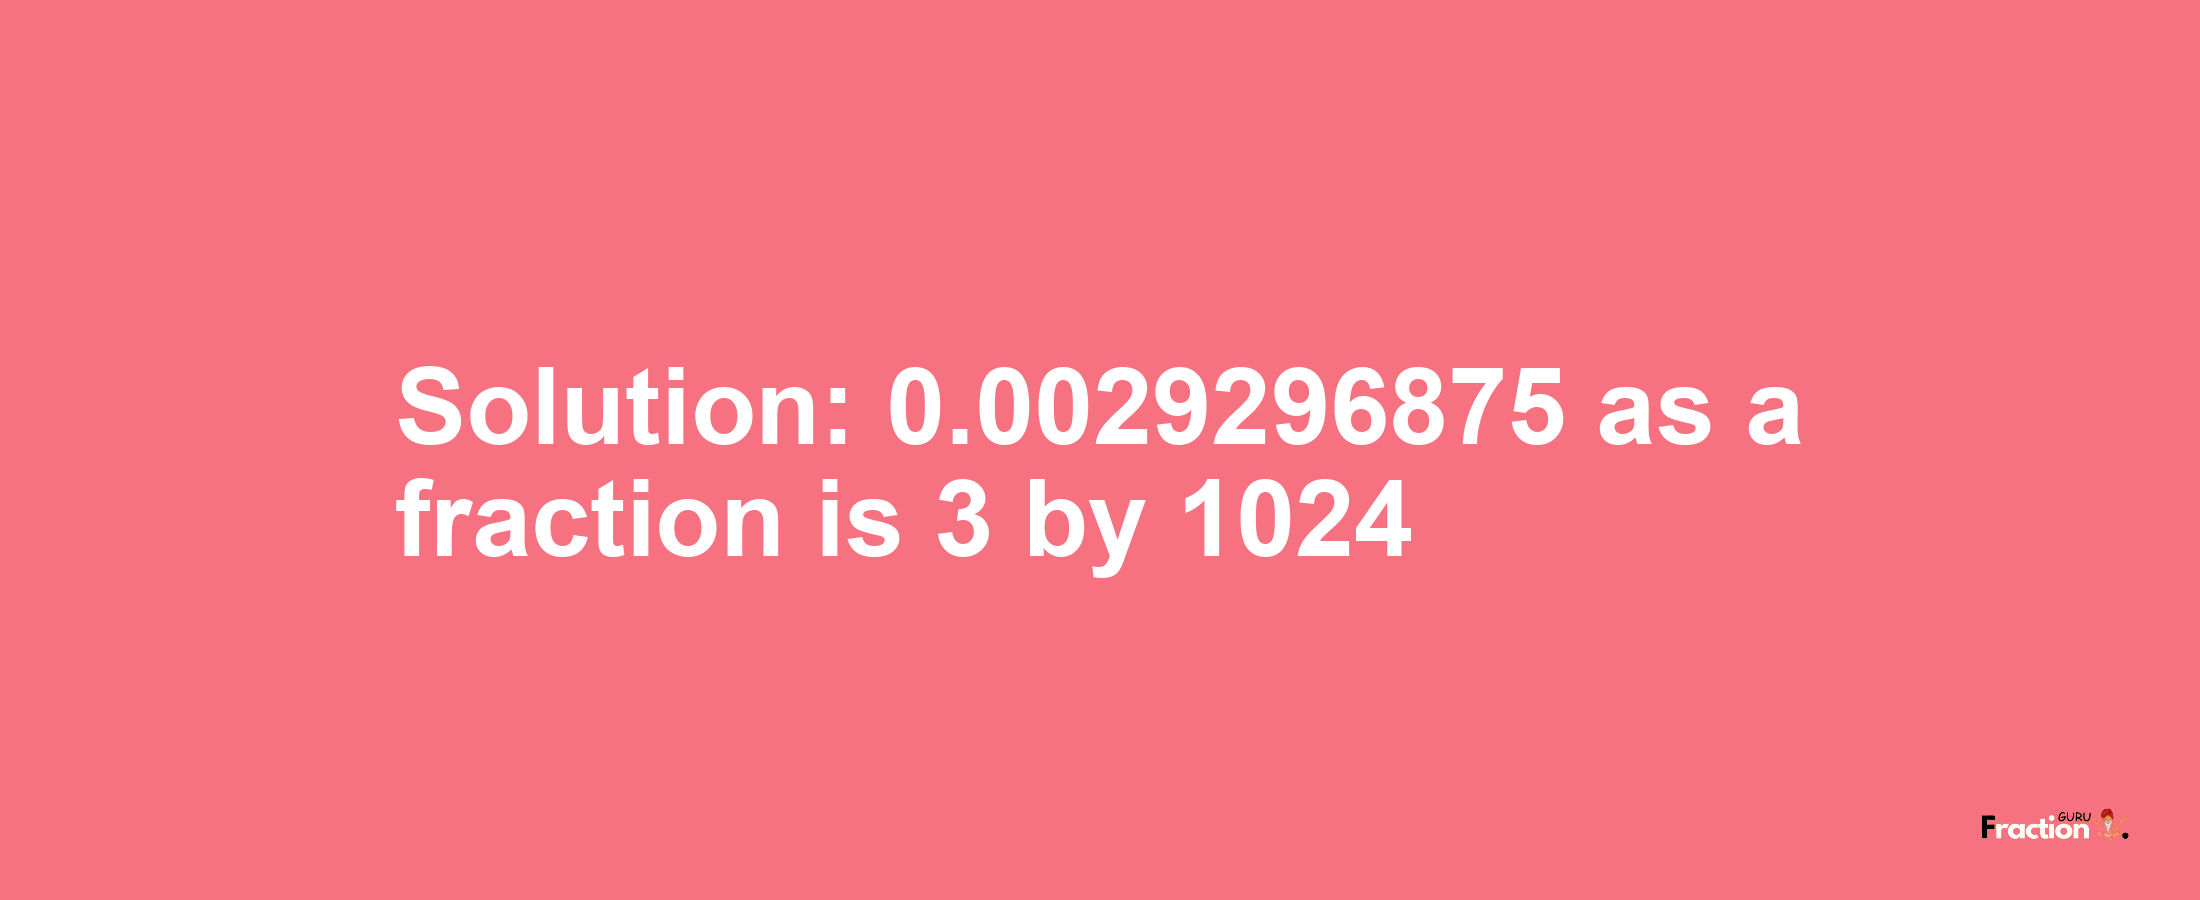 Solution:0.0029296875 as a fraction is 3/1024